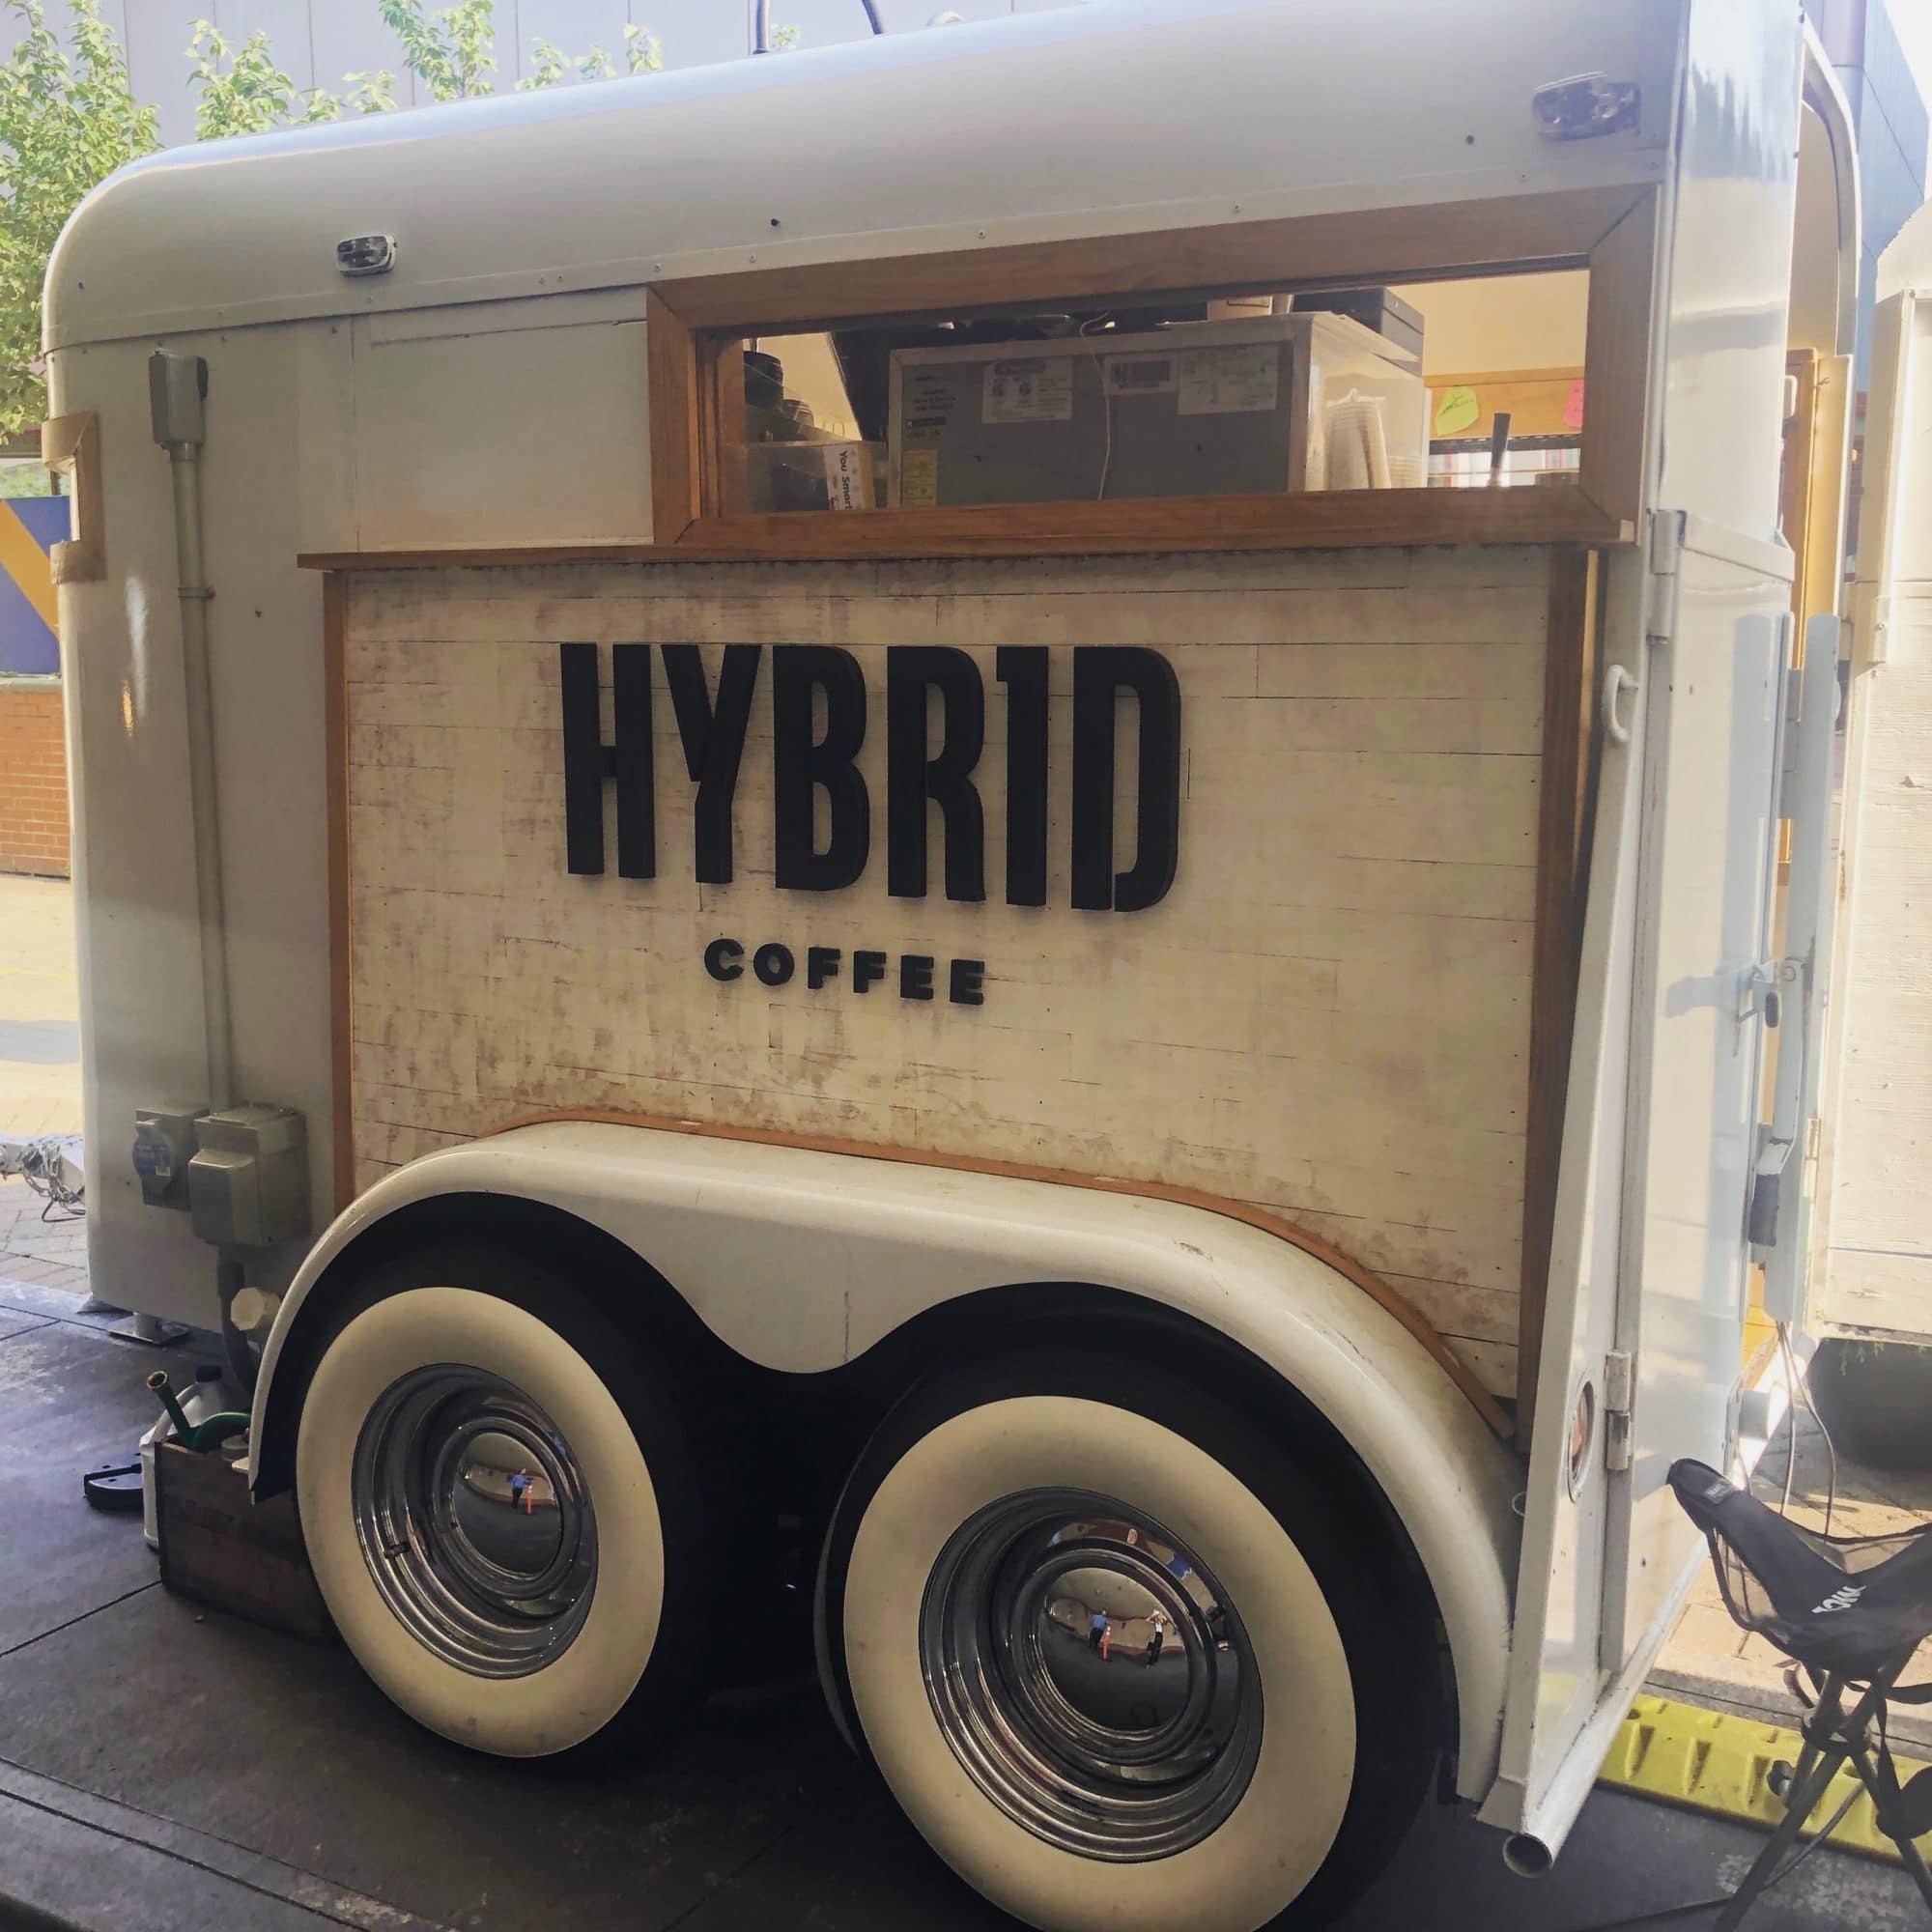 Modcup Coffee: From Coffee Cart to Café in Jersey City - Hoboken Girl